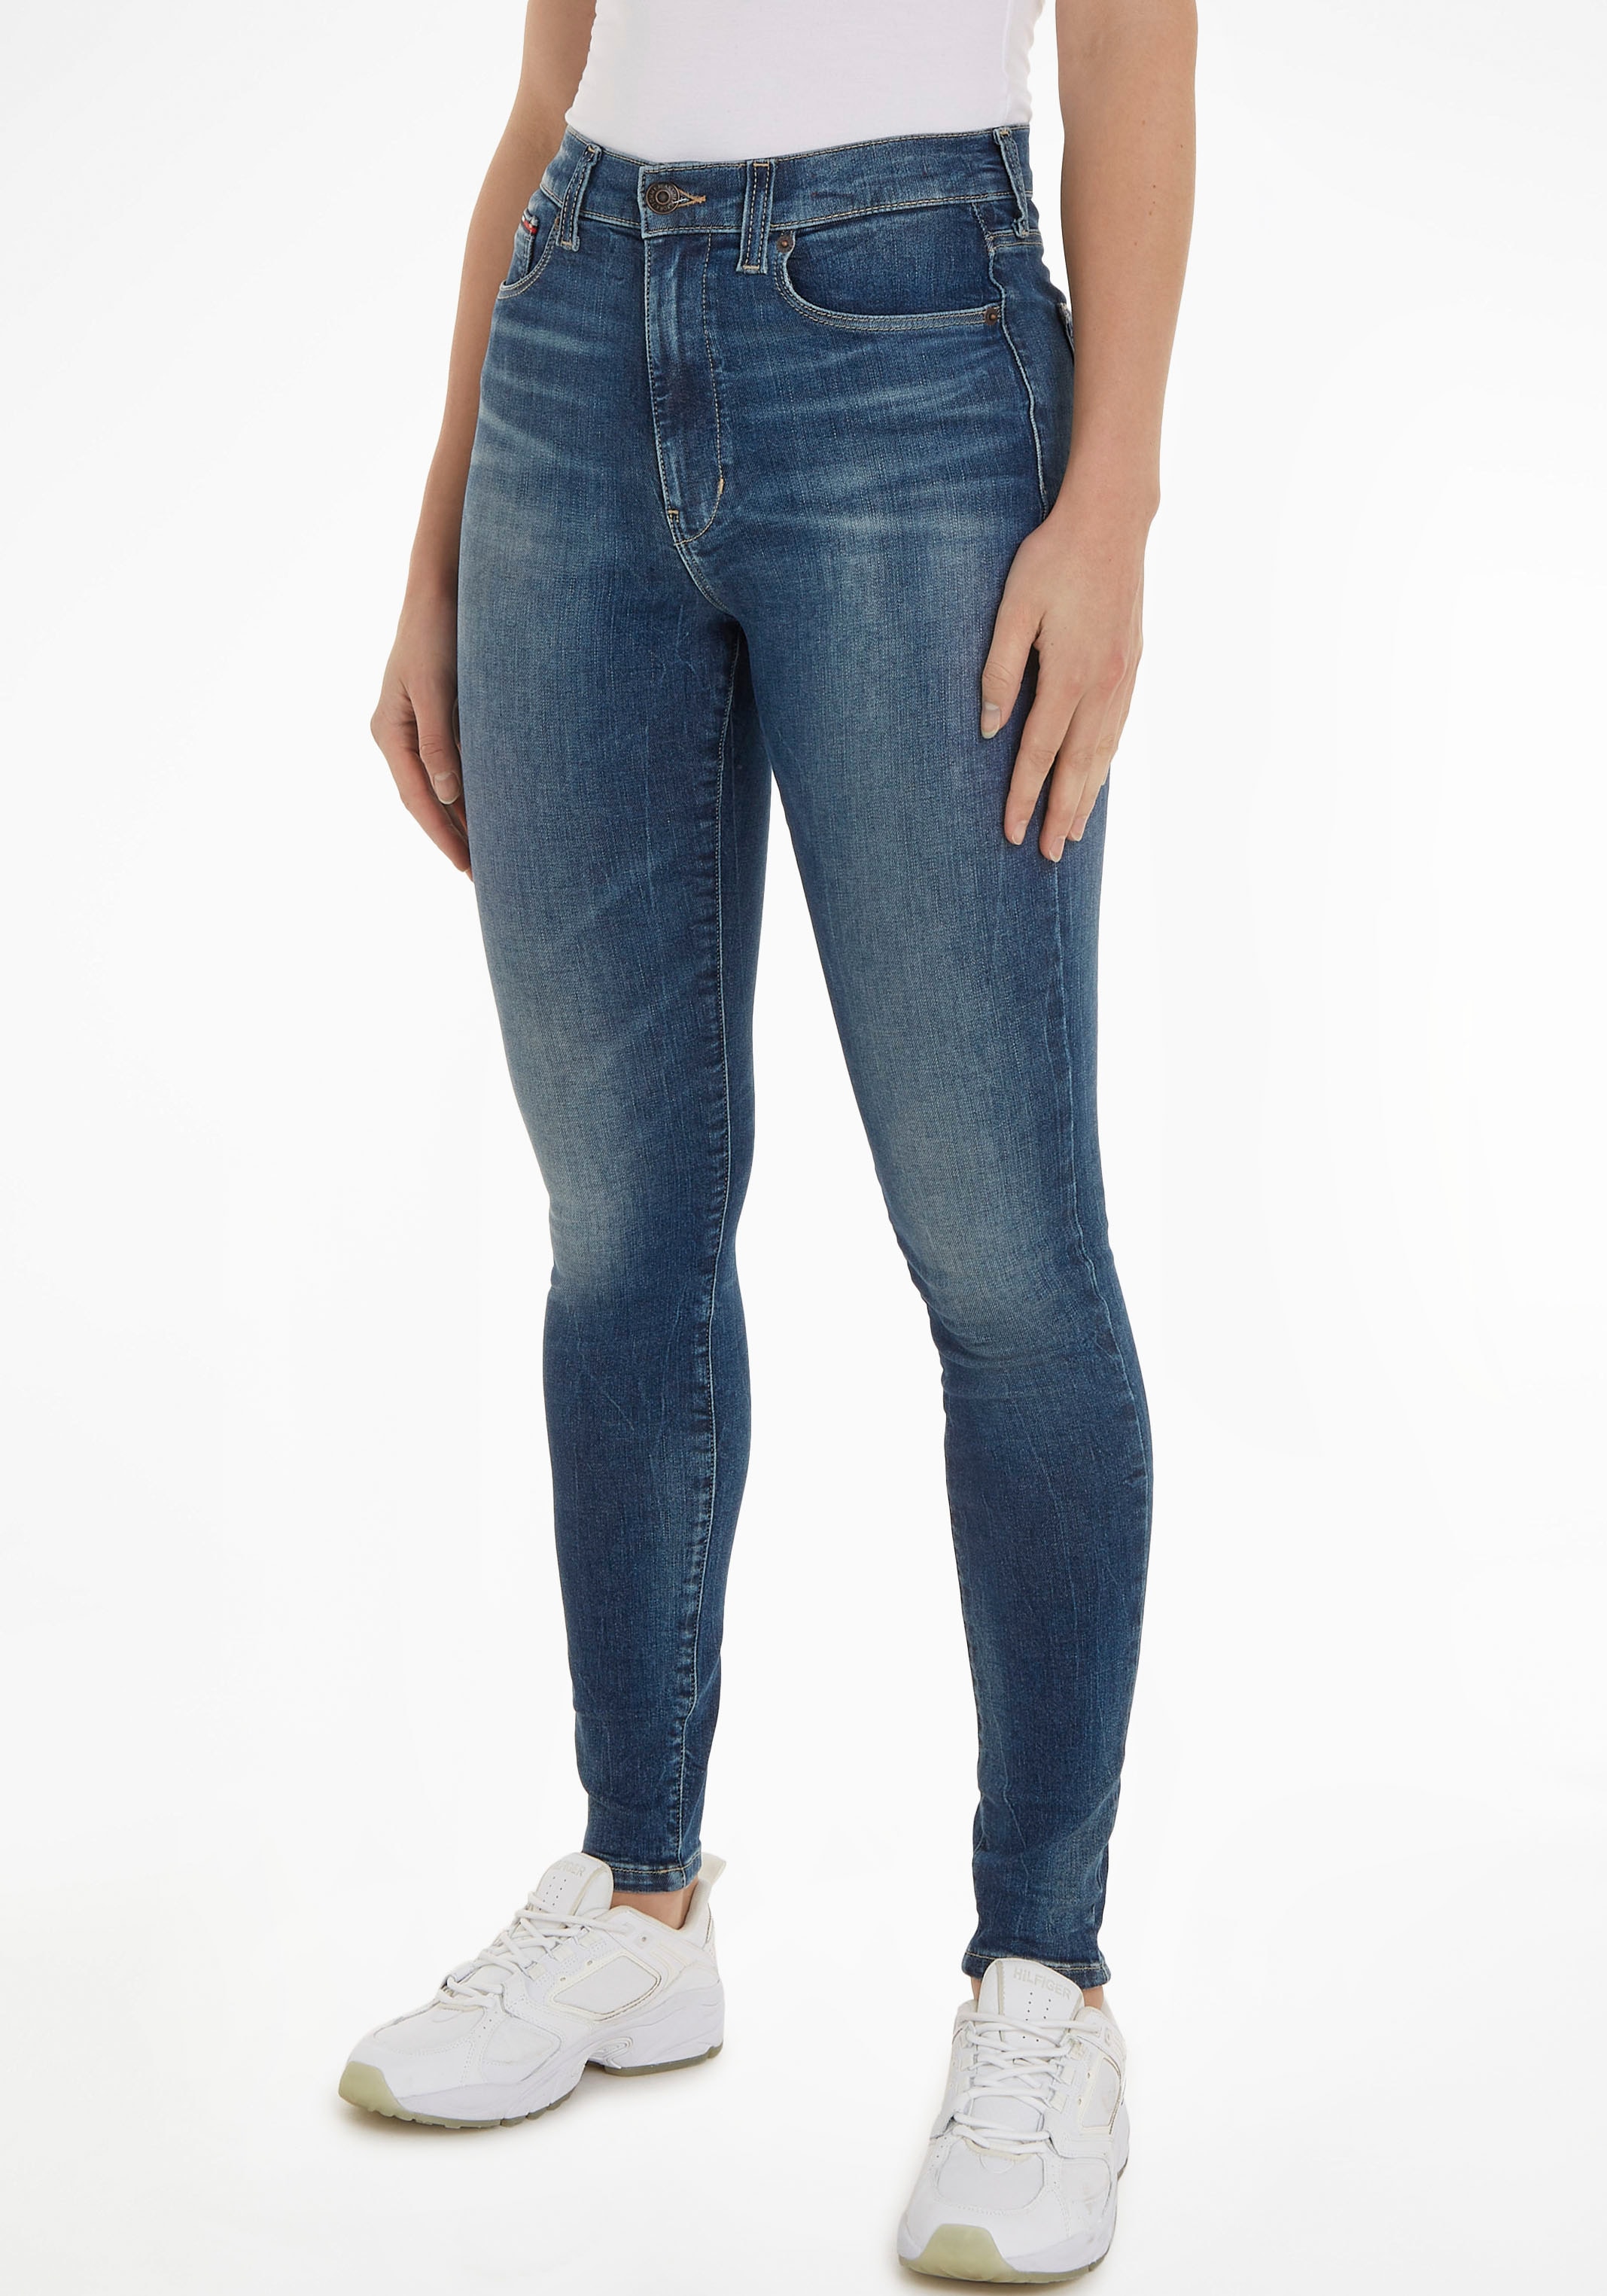 Online HR SSKN mit SYLVIA Logobadge Shop im OTTO Skinny-fit-Jeans und »Jeans CG4«, Labelflags Jeans Tommy